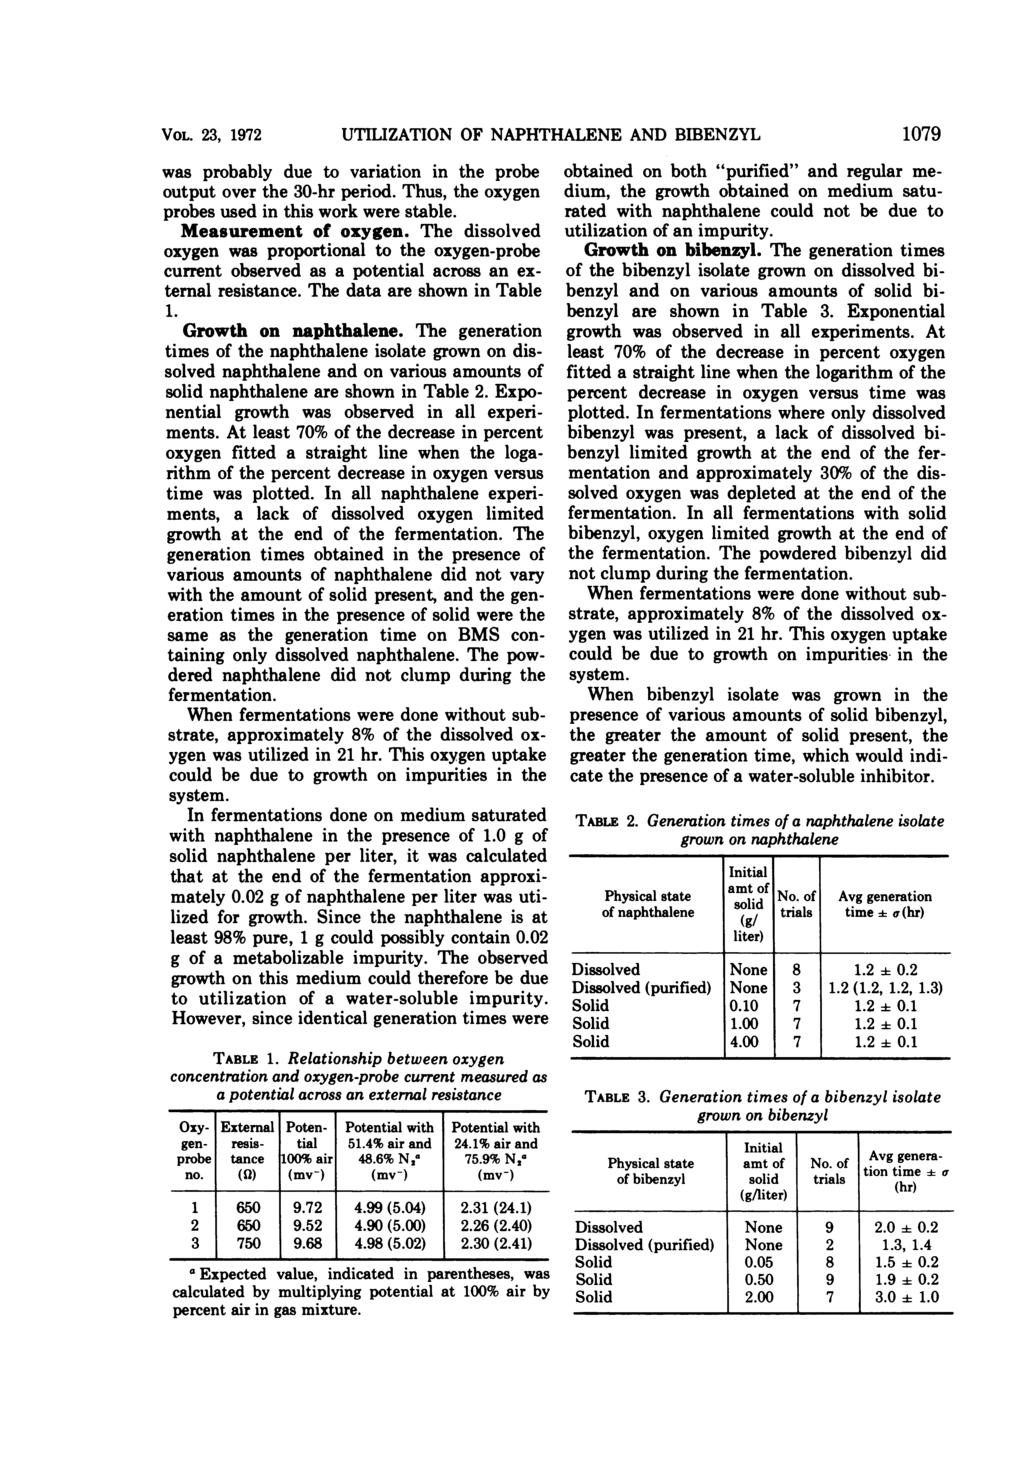 VOL. 23, 1972 UTILIZATION OF NAPHTHALENE AND BIBENZYL 1079 was probably due to variation in the probe output over the 30-hr period. Thus, the oxygen probes used in this work were stable.